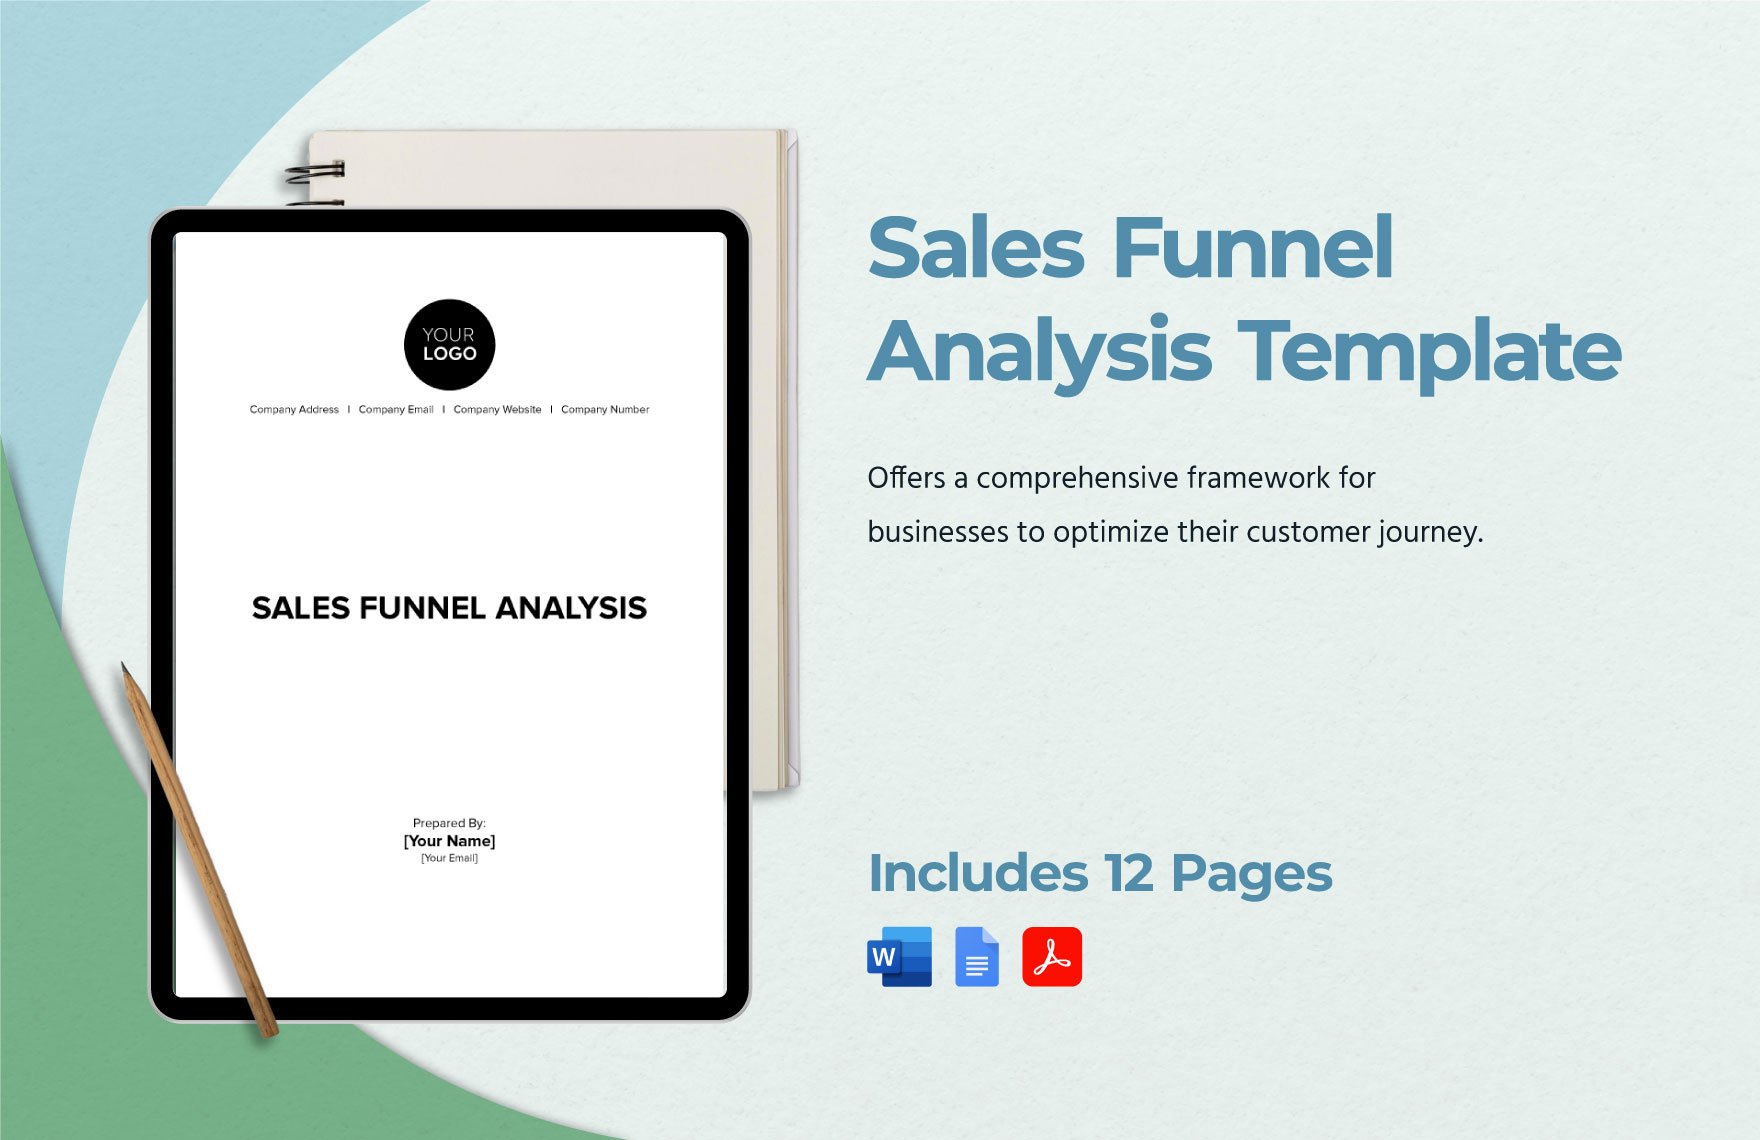 Sales Funnel Analysis Template in Word, Google Docs, PDF